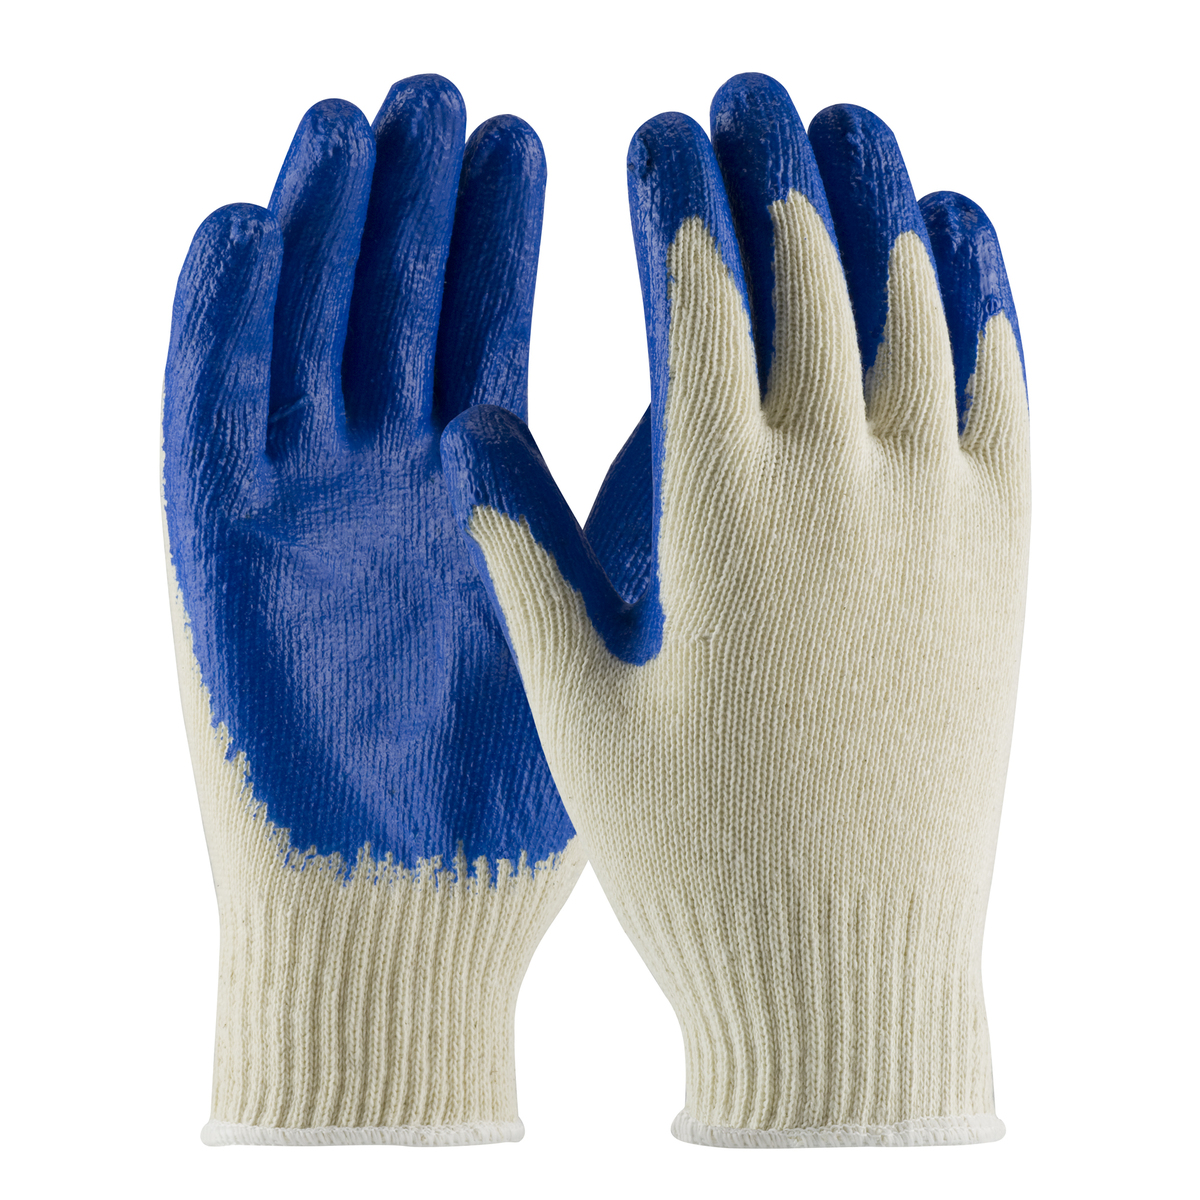 PIP® Small  7 Gauge Blue Nitrile Palm And Finger Coated Work Gloves With Cotton And Polyester Liner And Continuous Knit Wrist